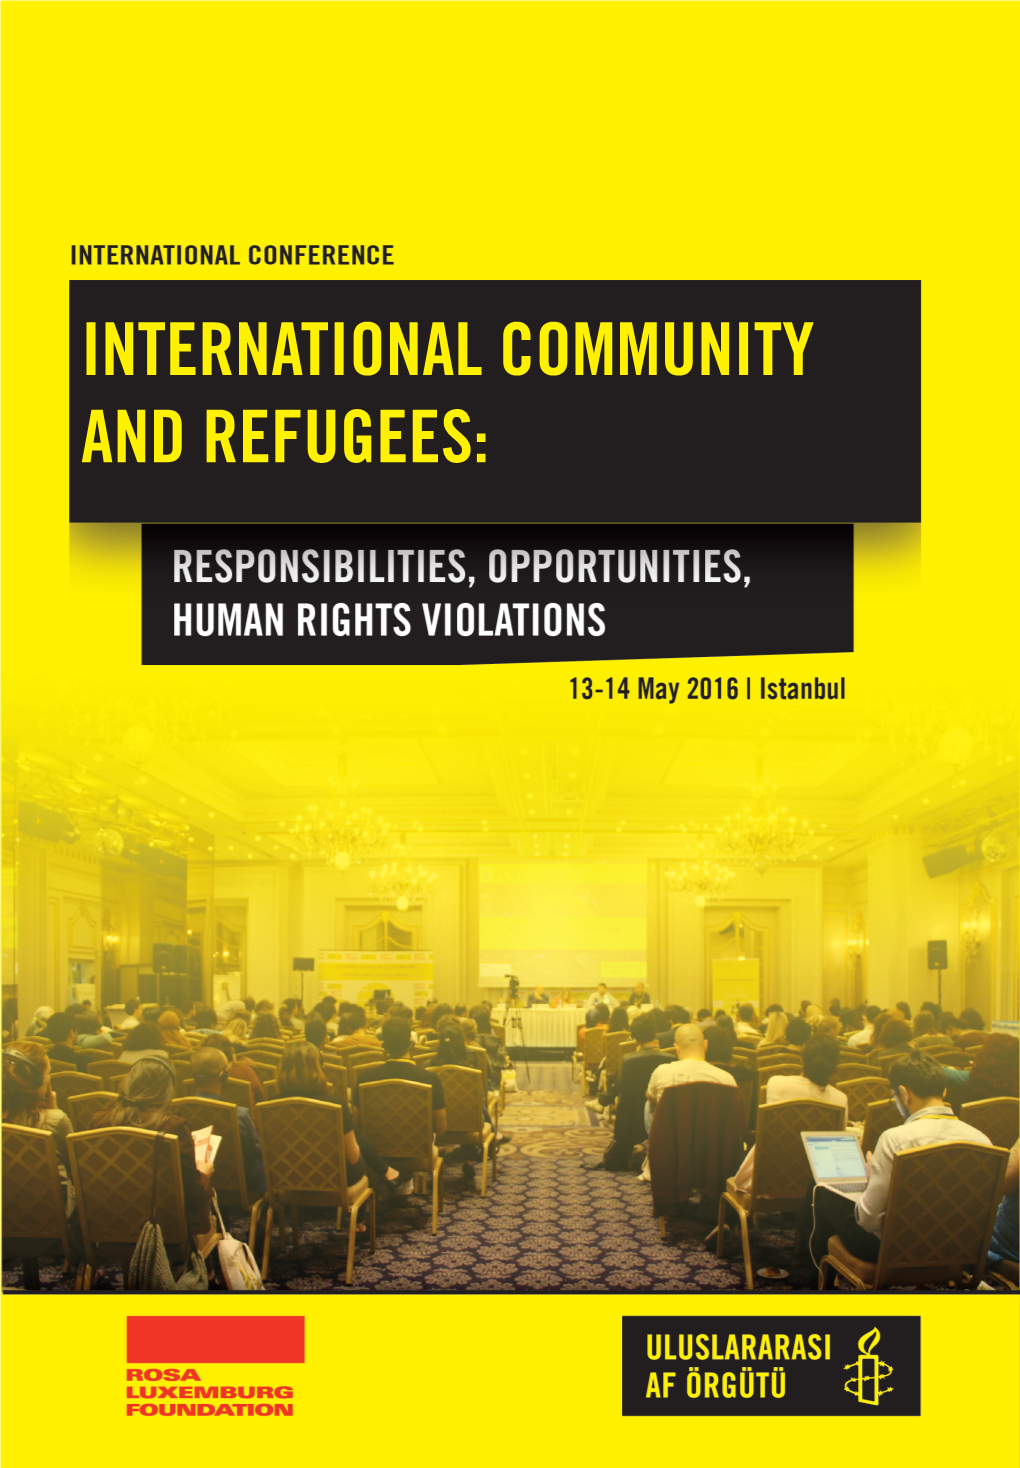 International Community and Refugees: International Community and Refugees: Responsibilities, Possibilities, Human Rights Violations